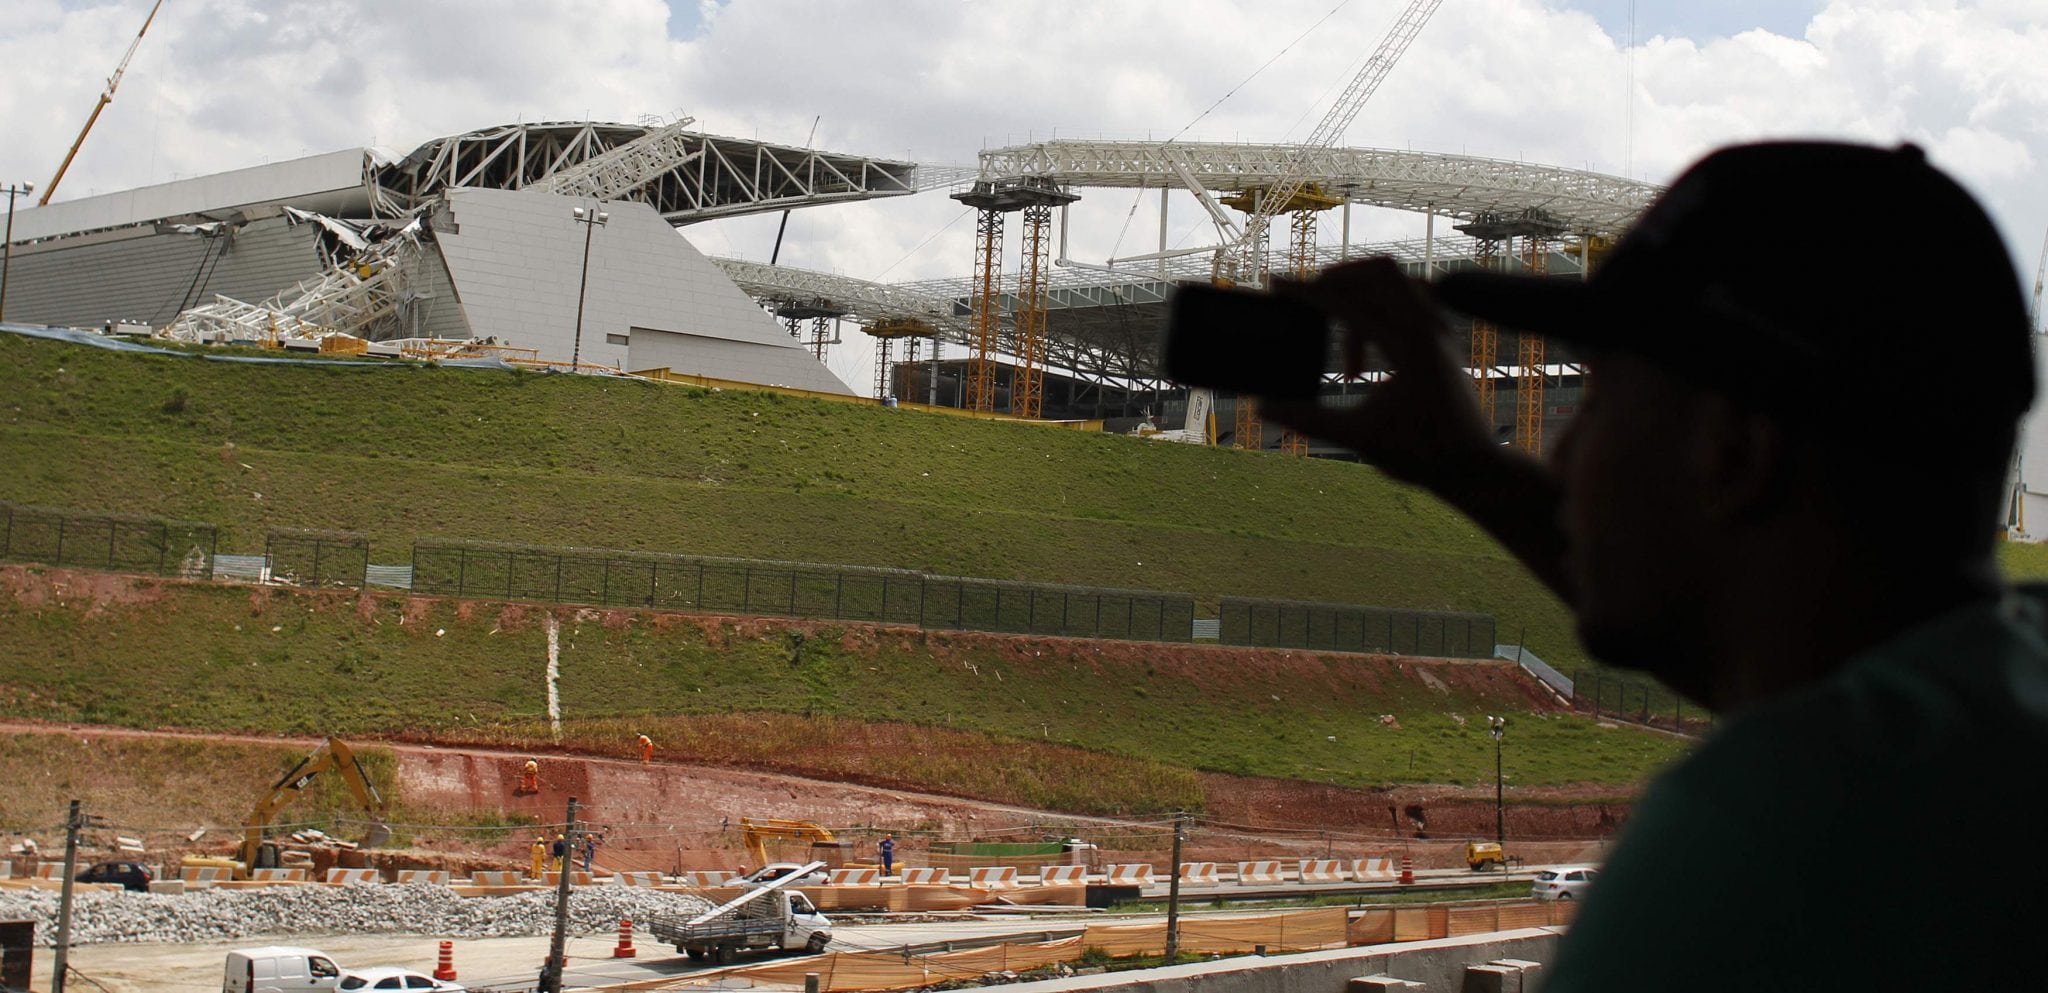 A man takes a picture of a crane that collapsed on the site of the Arena Sao Paulo stadium, known as "Itaquerao", which will host the opening soccer match of the 2014 World Cup, in Sao Paulo. 